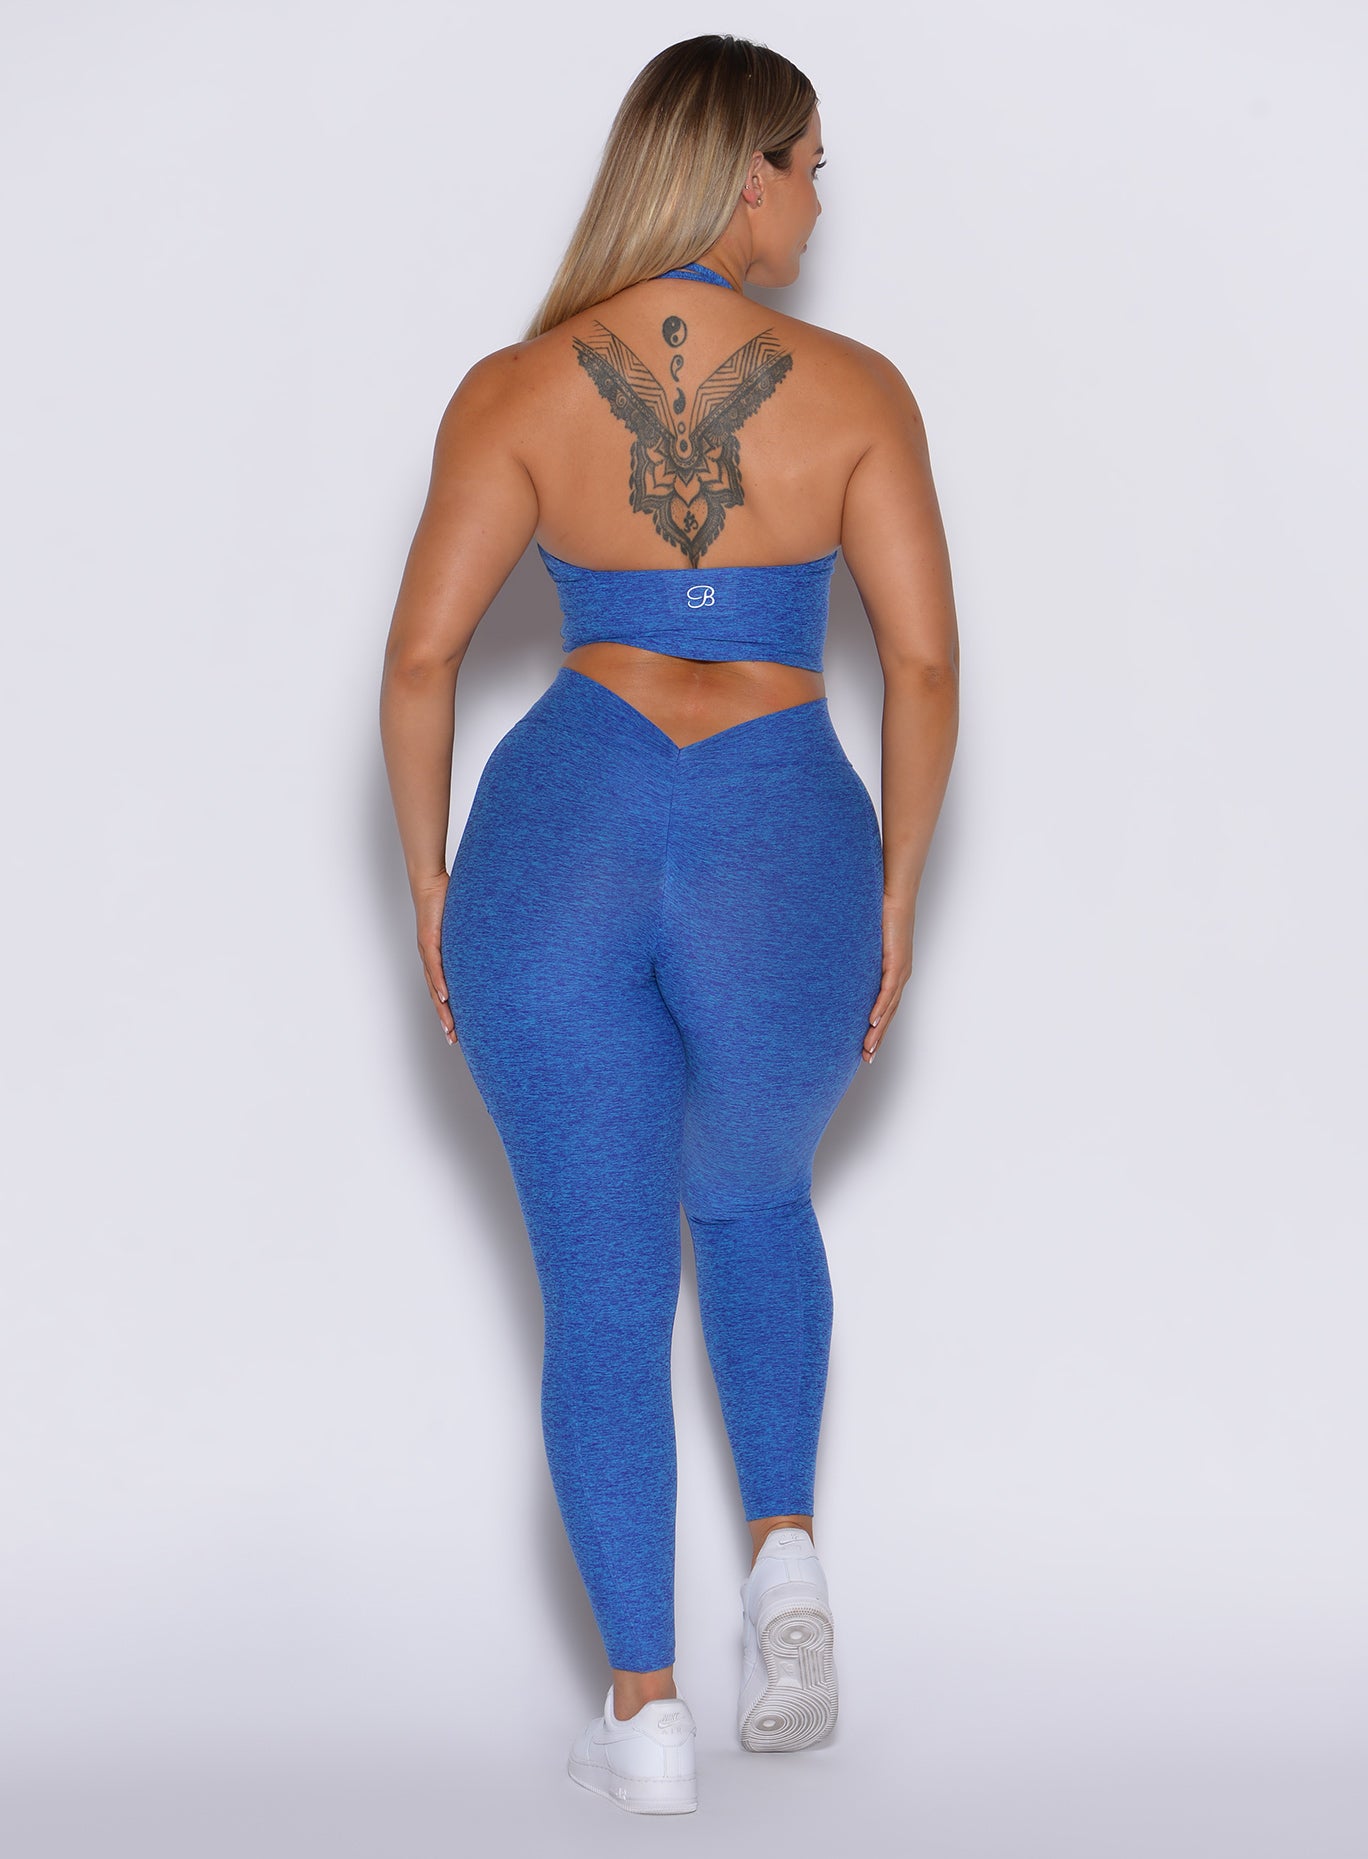 back profile view of a model wearing our V back leggings in Neon blue rave color along with a matching bra